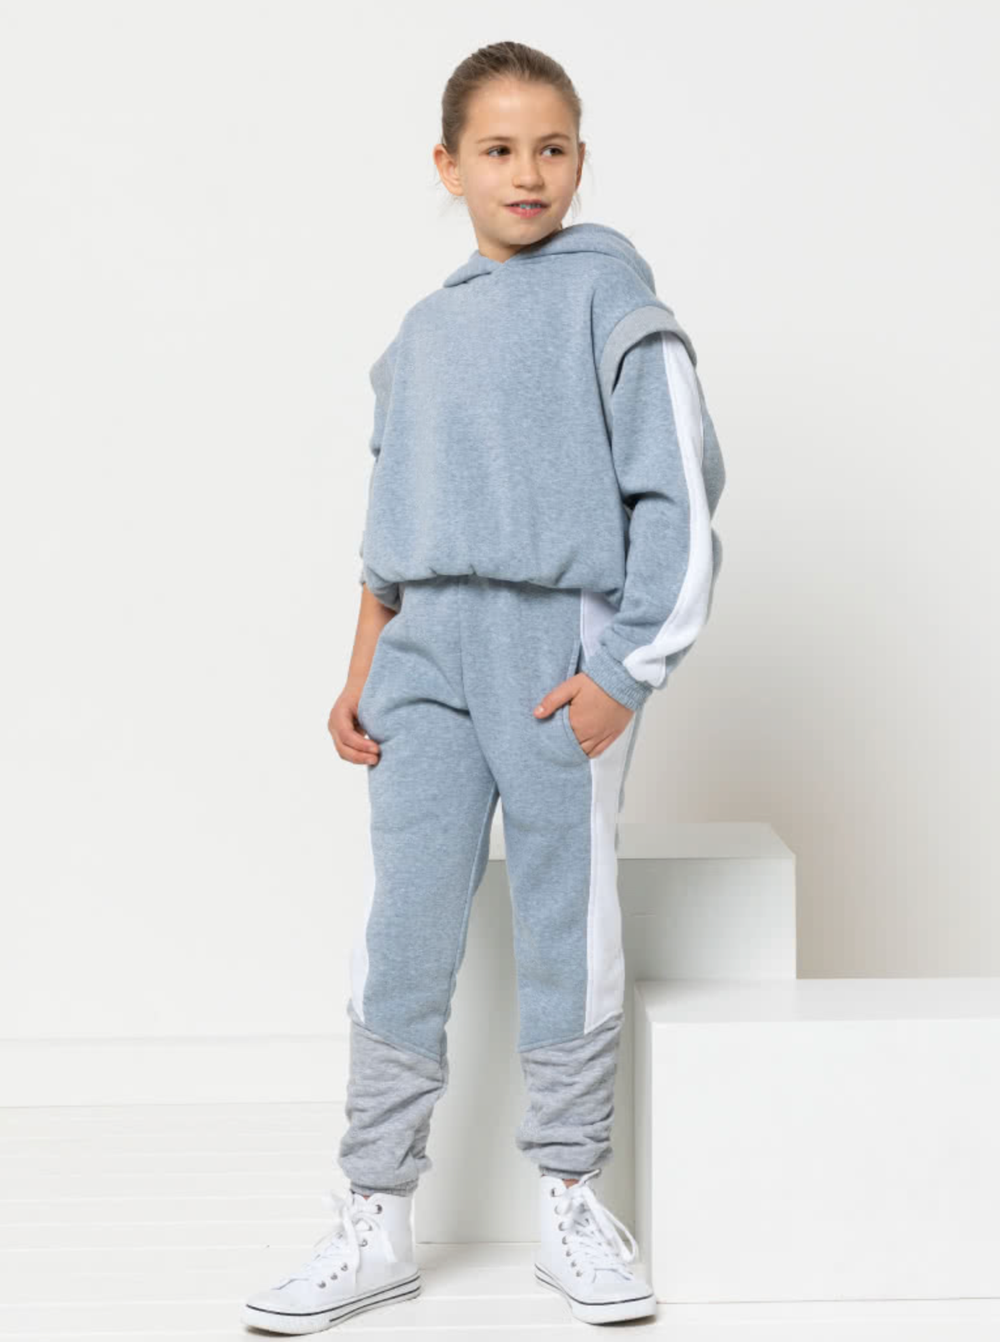 Child wearing the Child/Teen Beckett Sweater sewing pattern from Style Arc on The Fold Line. A hoodie pattern made in fleece, jersey, or sweater knit fabrics, featuring a pull-on style, hood, elasticated waistband and sleeve cuffs, armhole inserts, and sl